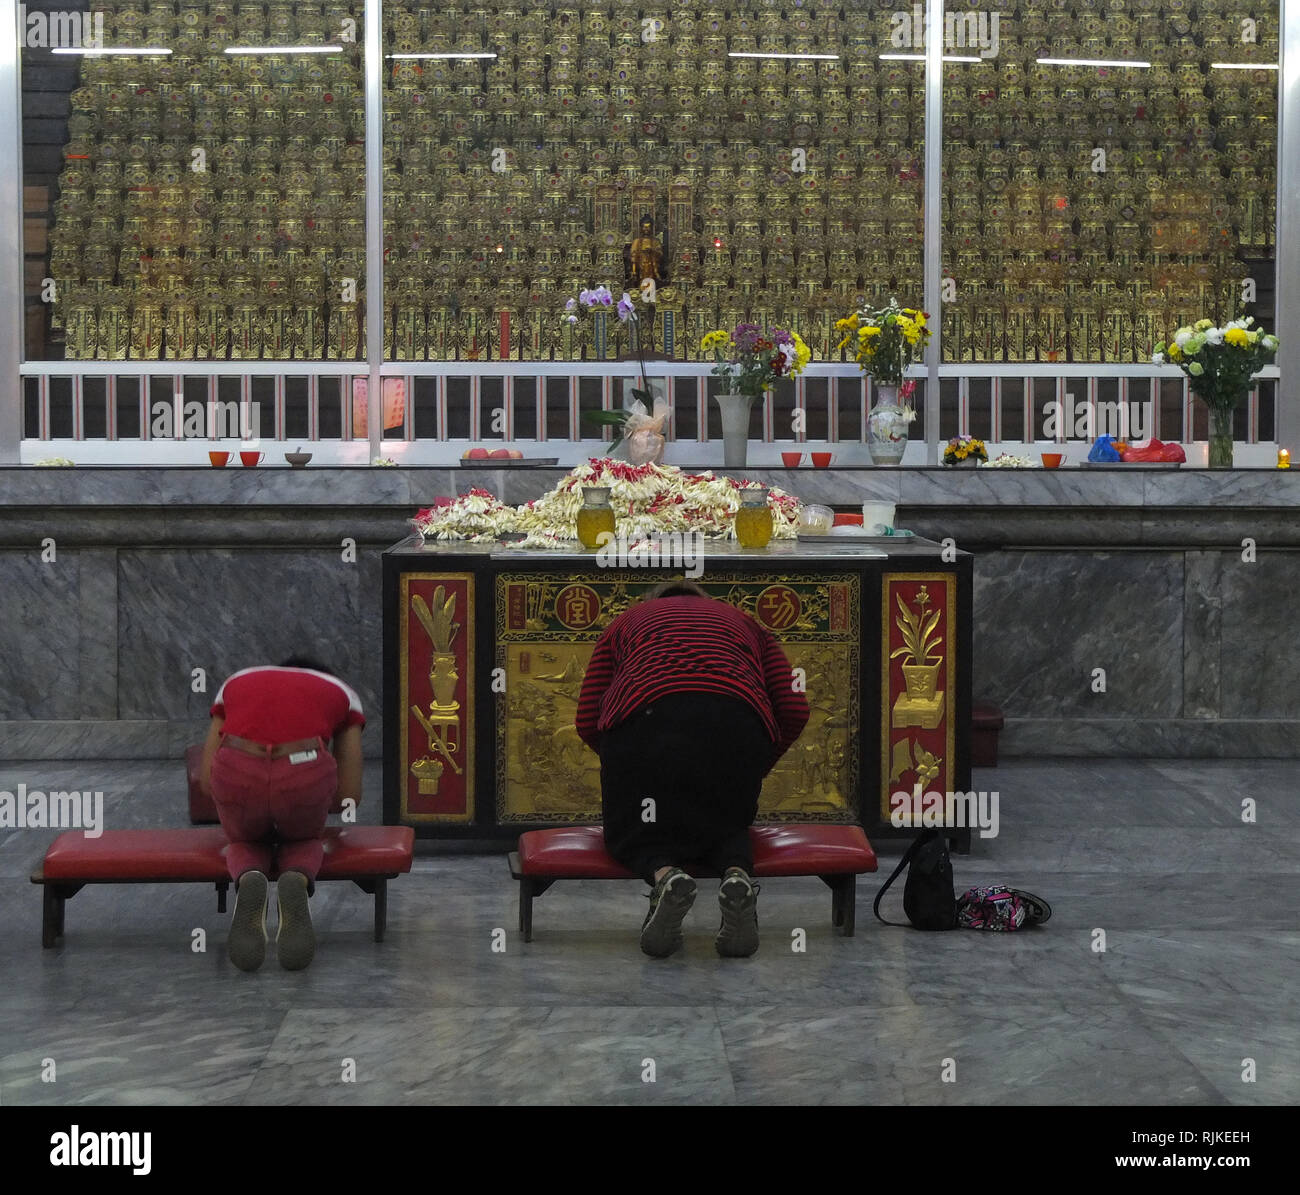 Chinese are seen giving respect to their deceased relatives at the Temple. Senguan Temple in the Philippines is a prominent Buddhist edifice in Manila.  It contains a stupa, a huge repository for urns of human ashes, several meditation rooms, and various shrines. It is a major cultural center for the Chinese Filipino community. Stock Photo